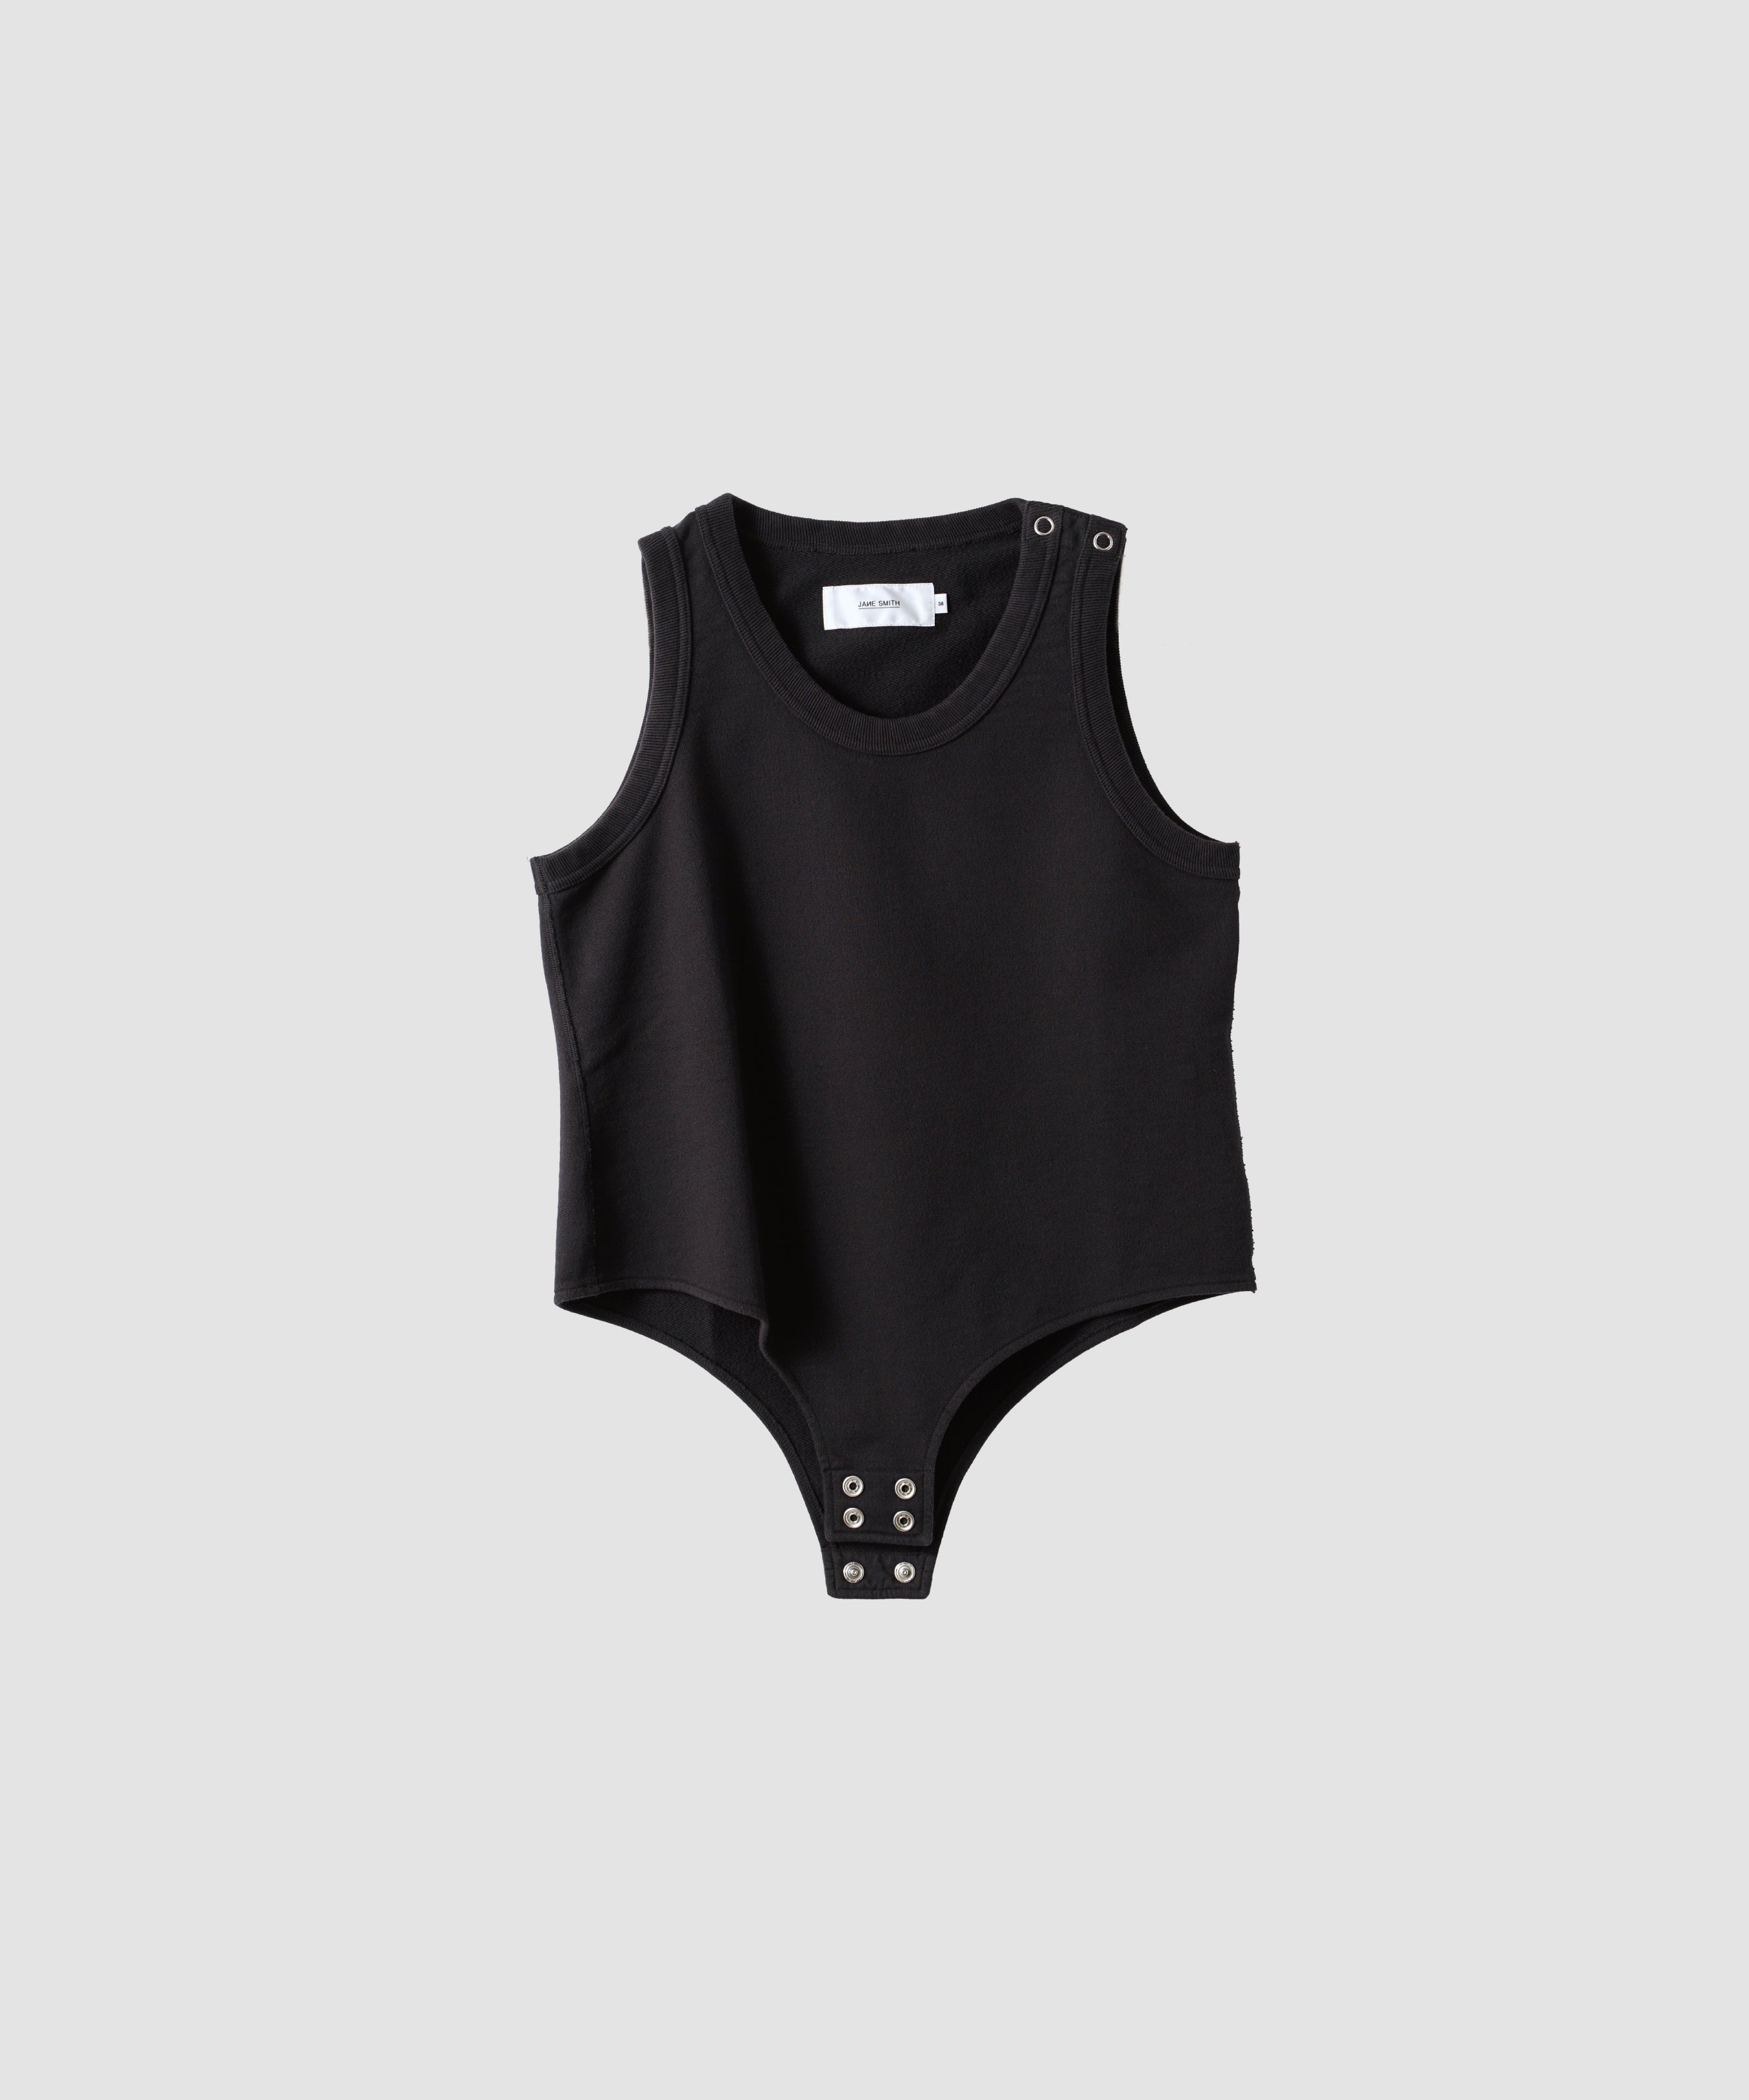 COTTON INLAY TANK TOP BODY SUIT